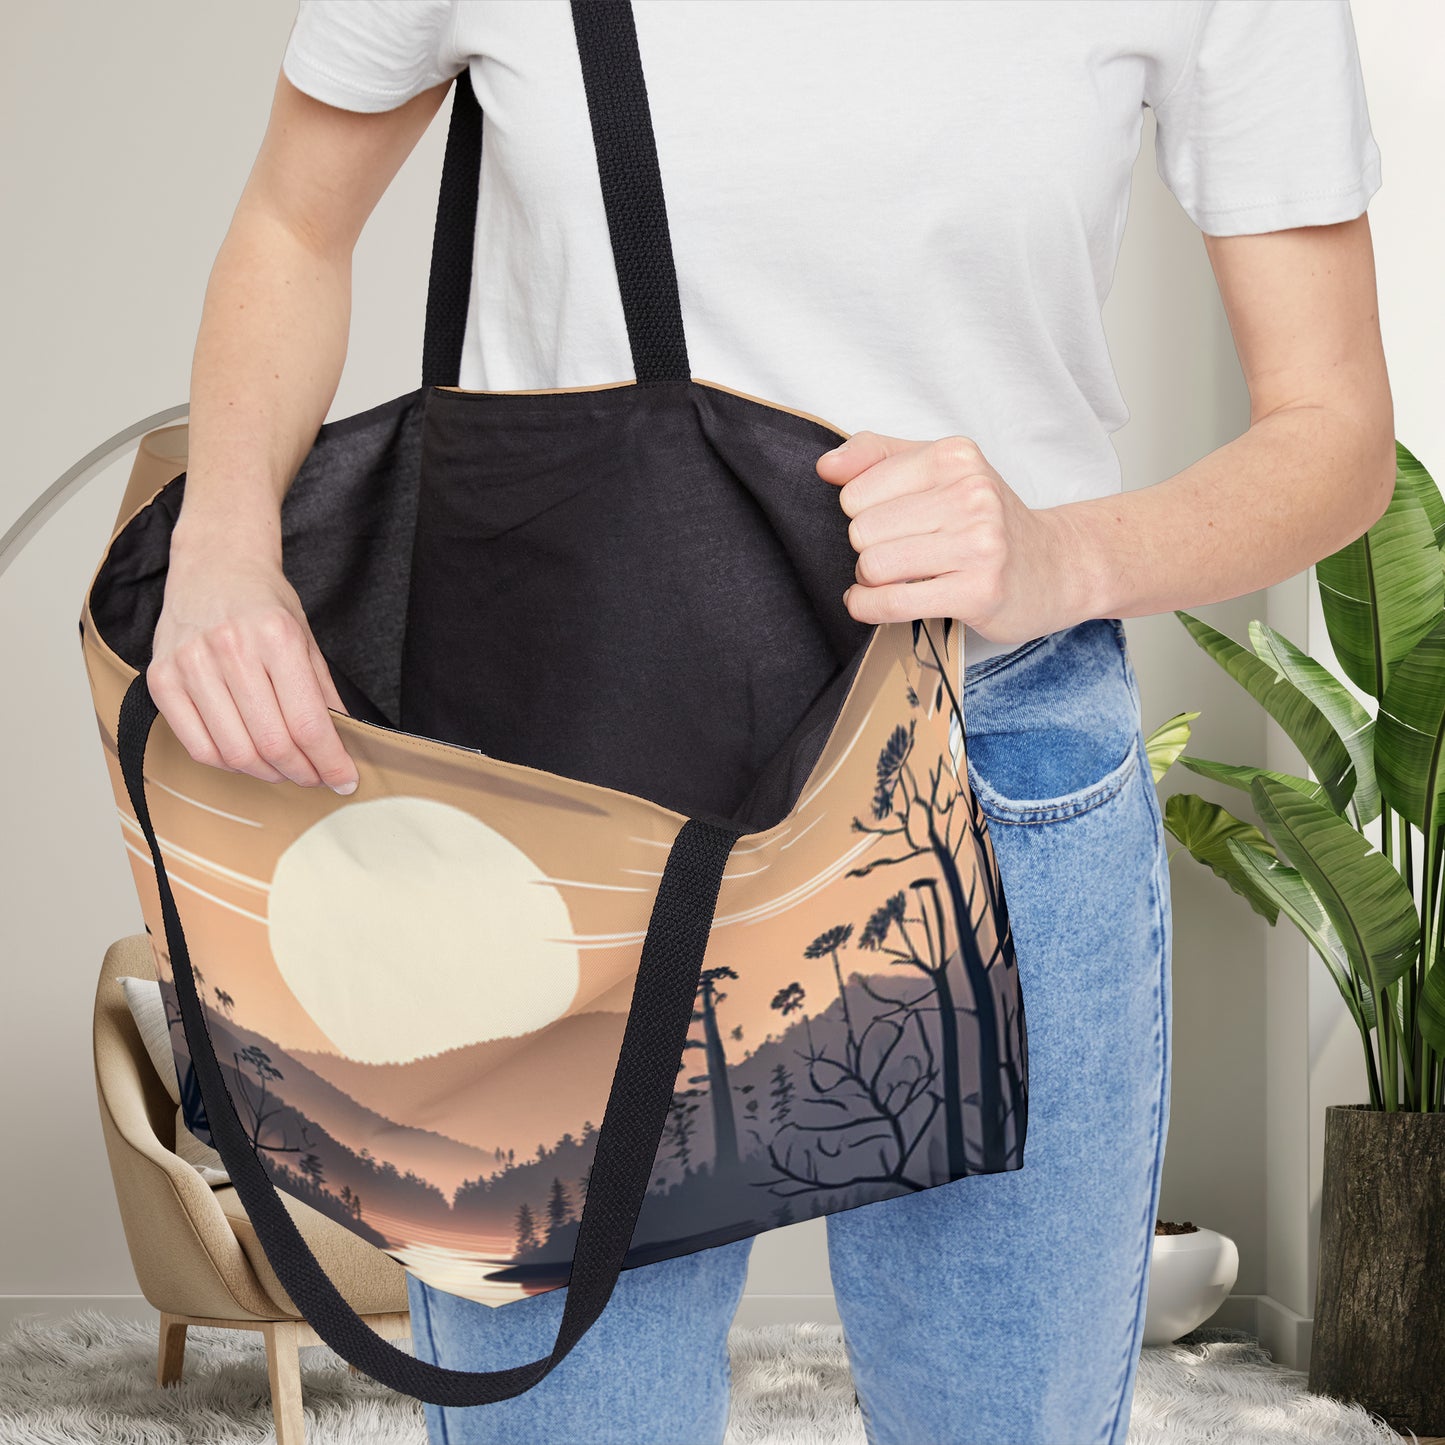 Peaceful nature setting on this Weekender Tote Bag.